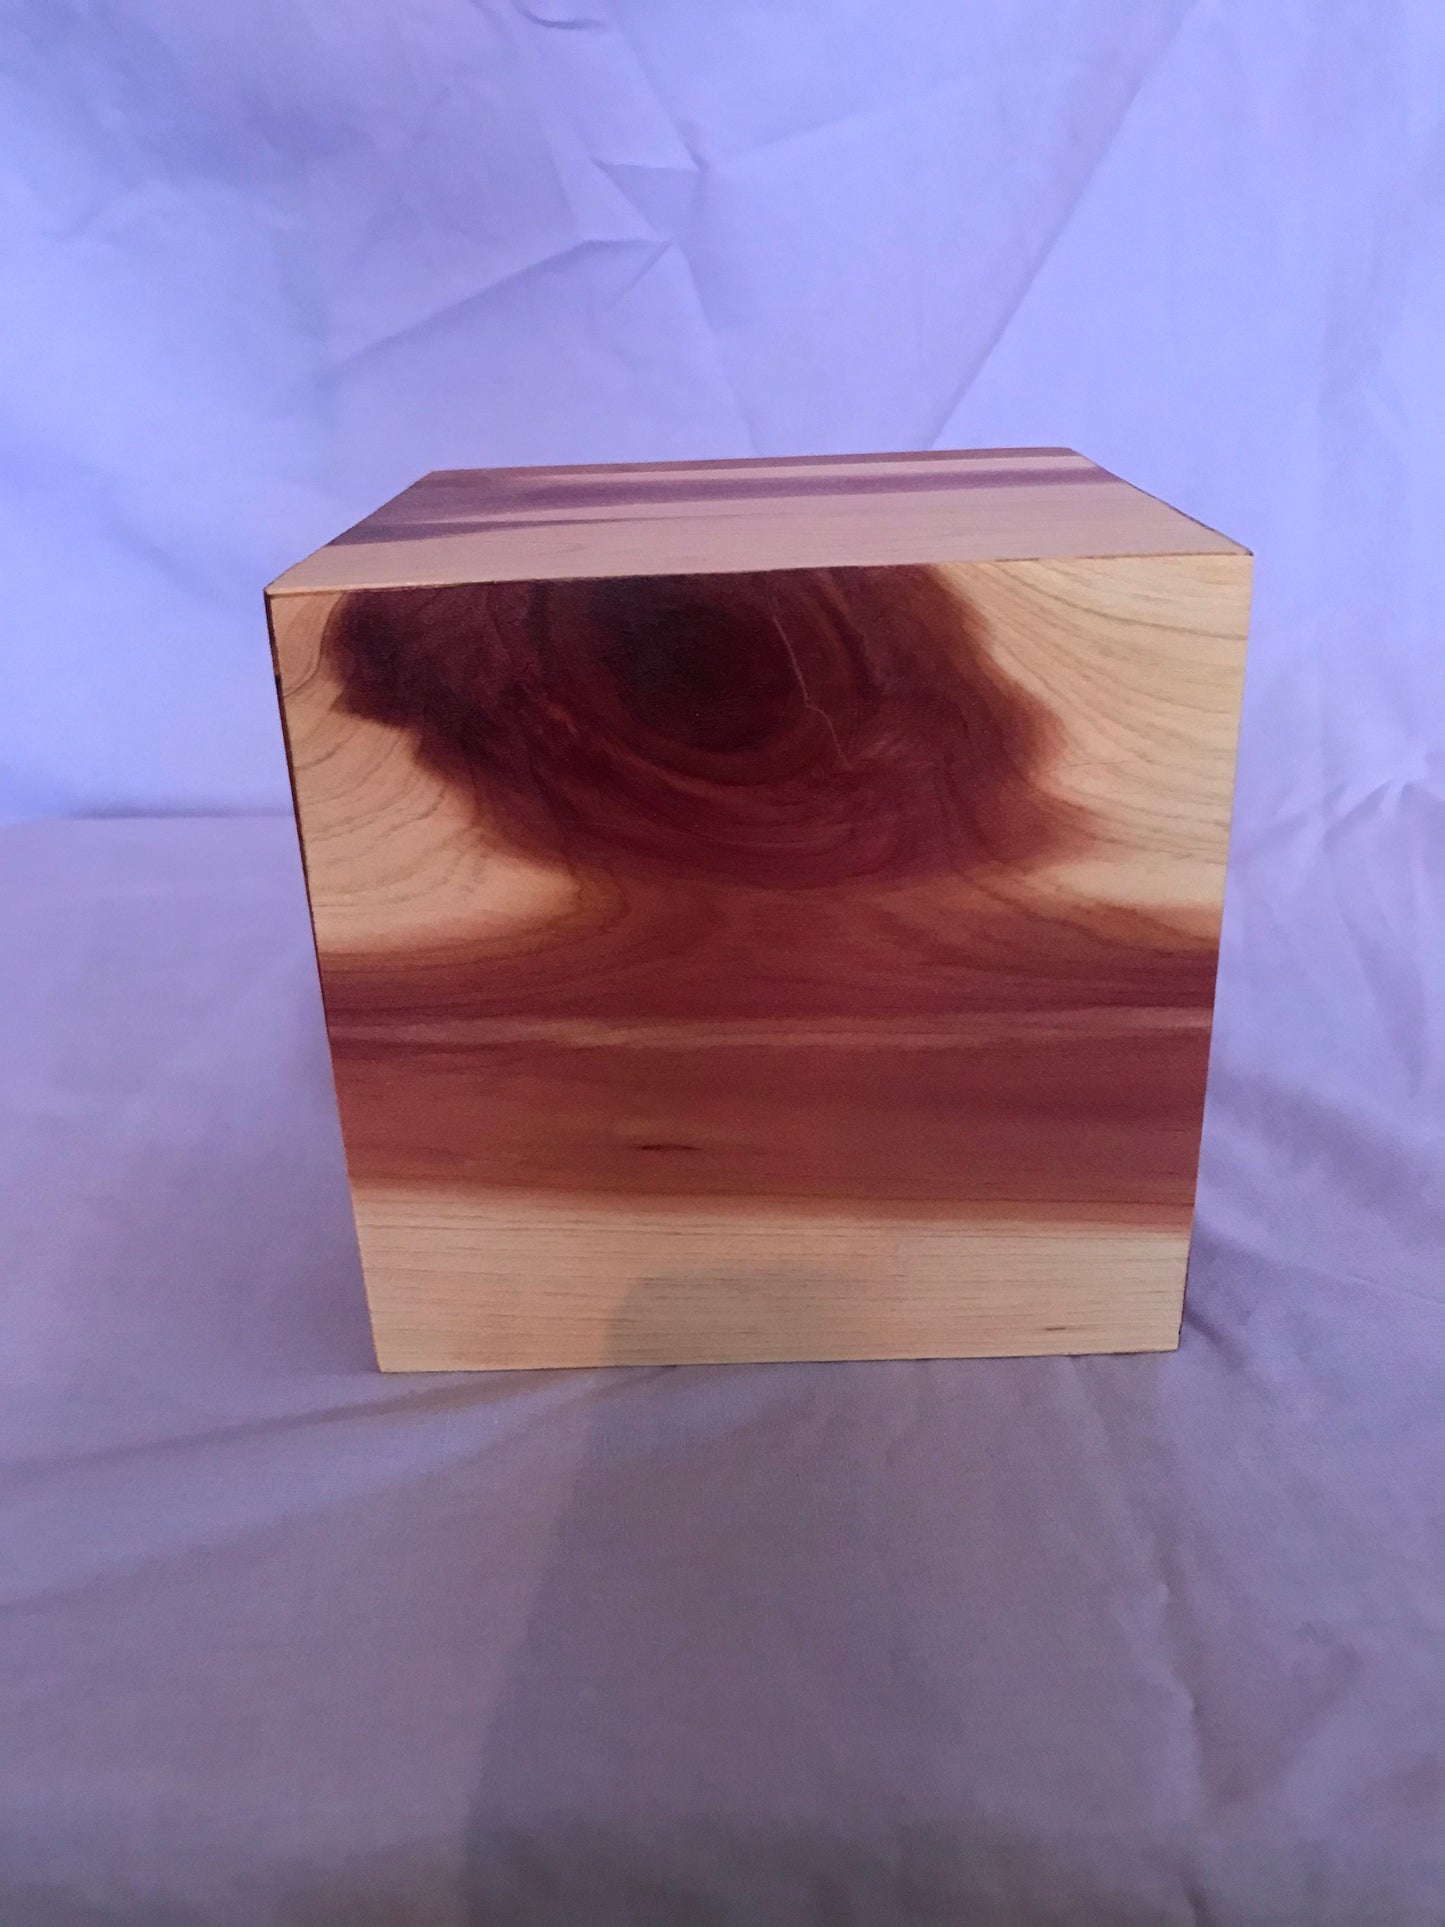 Aromatic Cedar Cremation Urn for ashes, up to 40 pounds